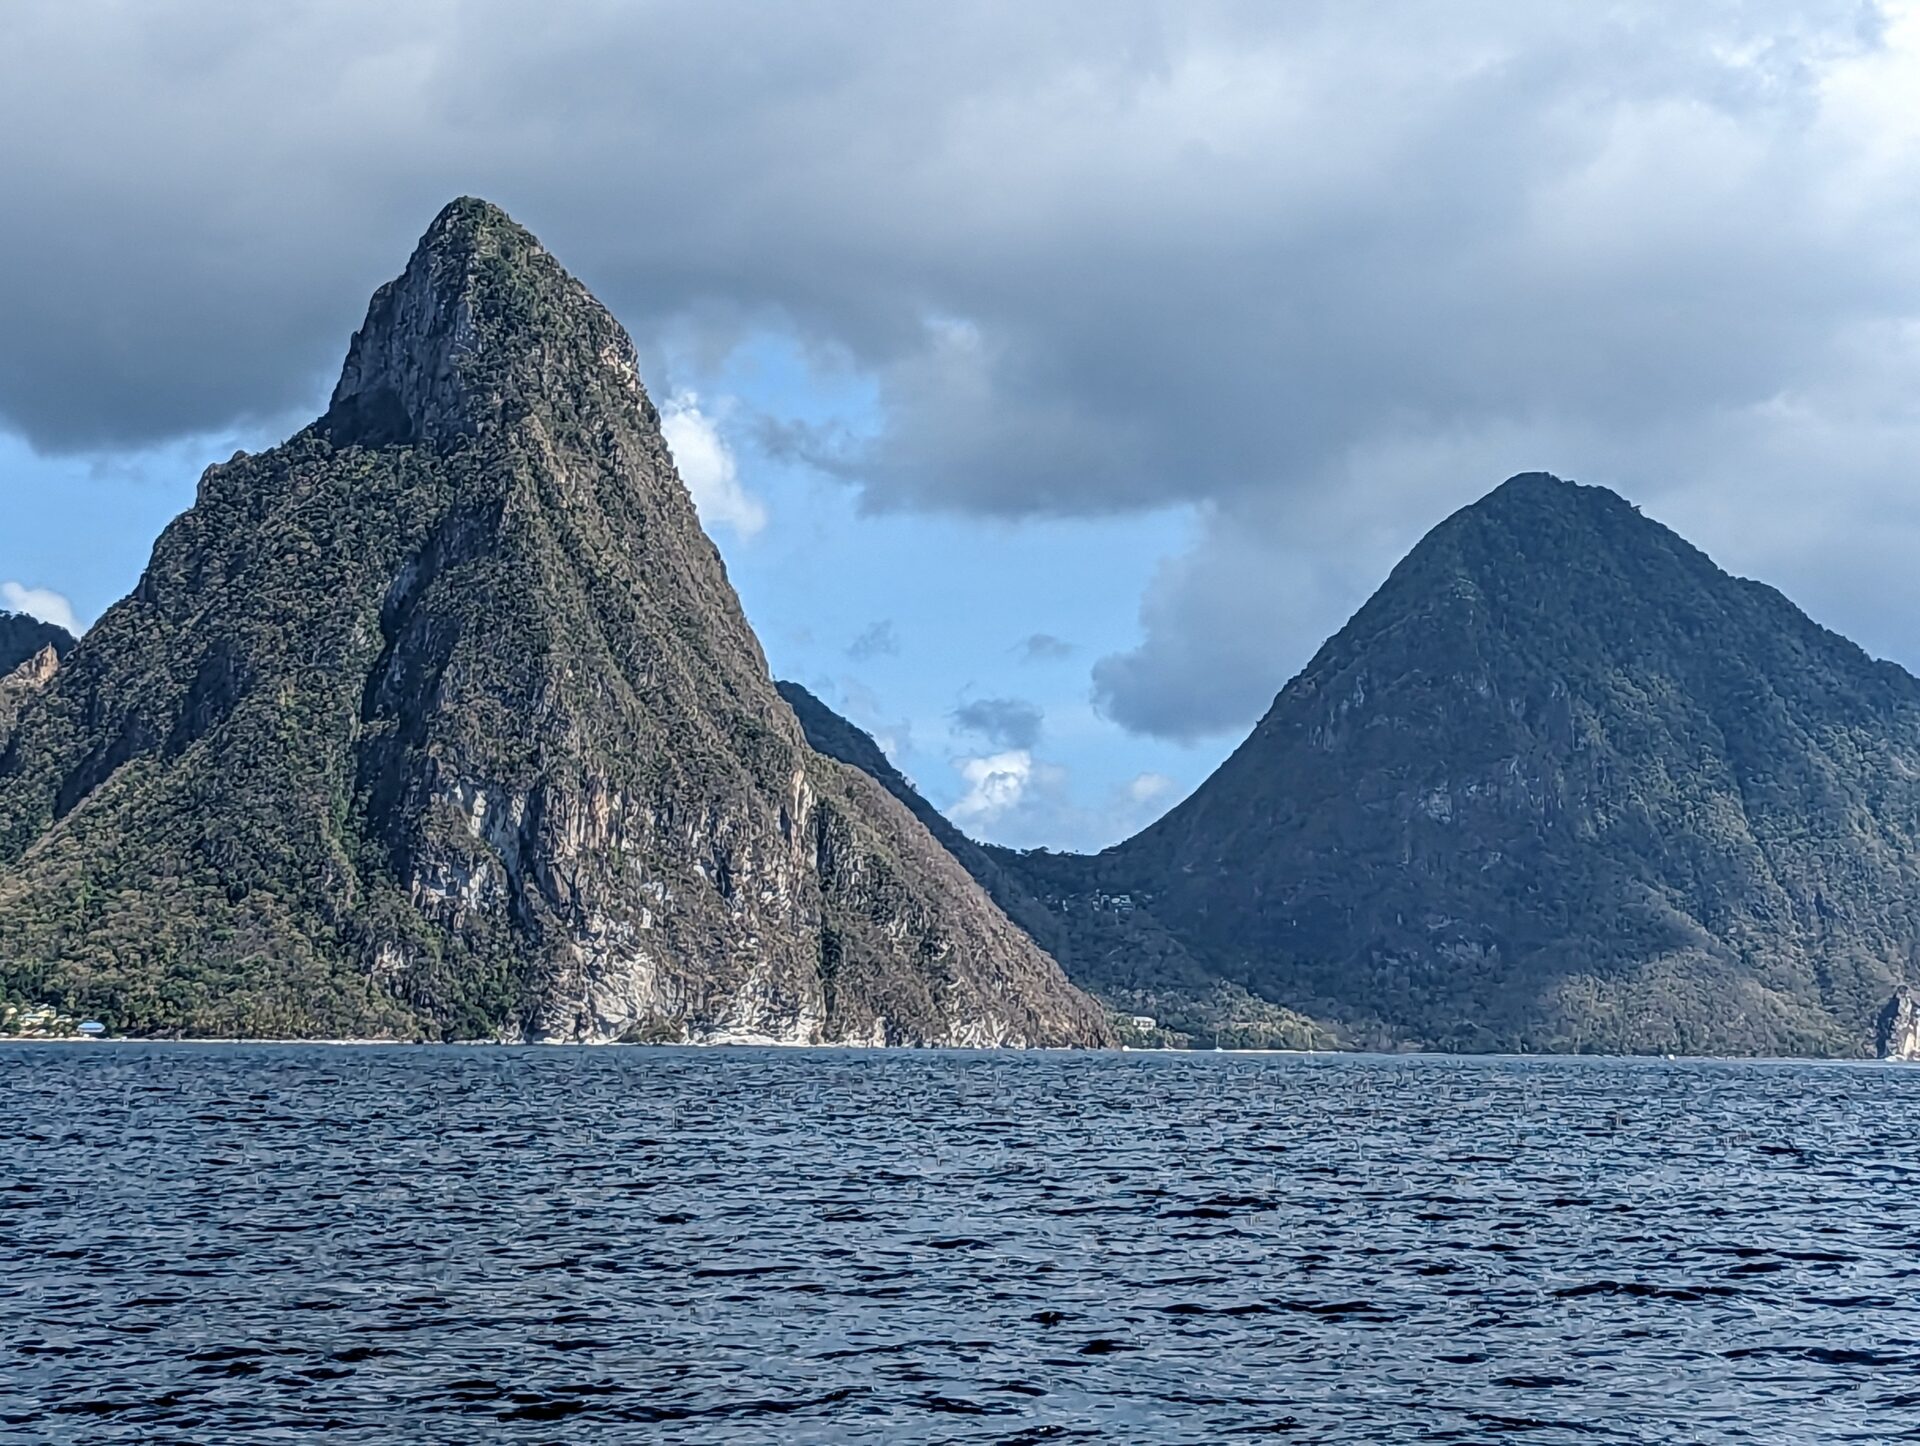 The Pitons of St. Lucia